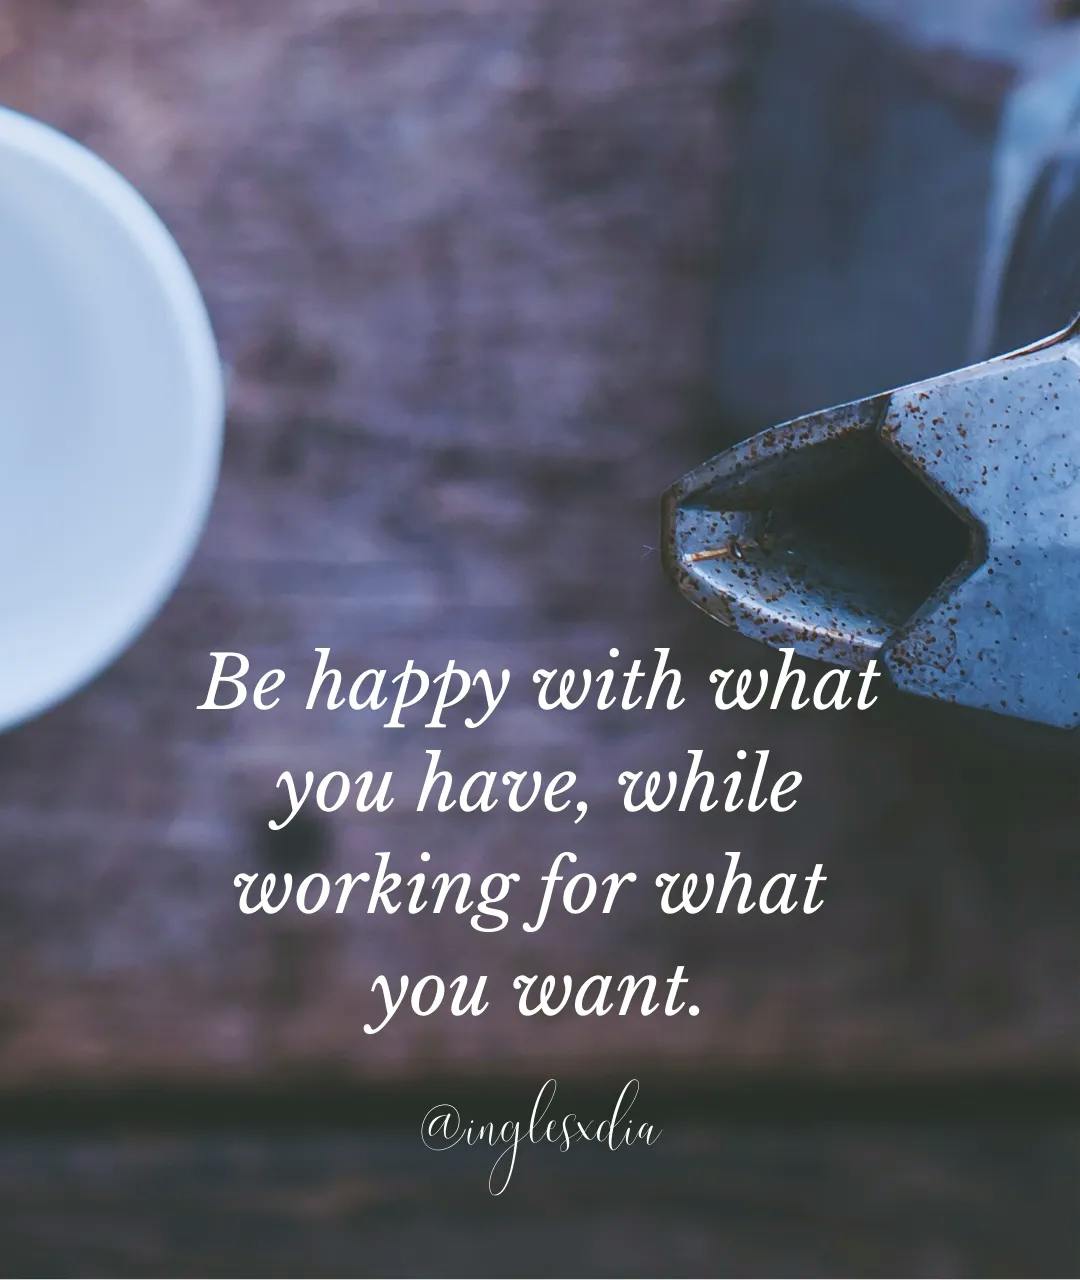 Frases motivadoras en inglés: Be happy with what you have, while working for what you want.